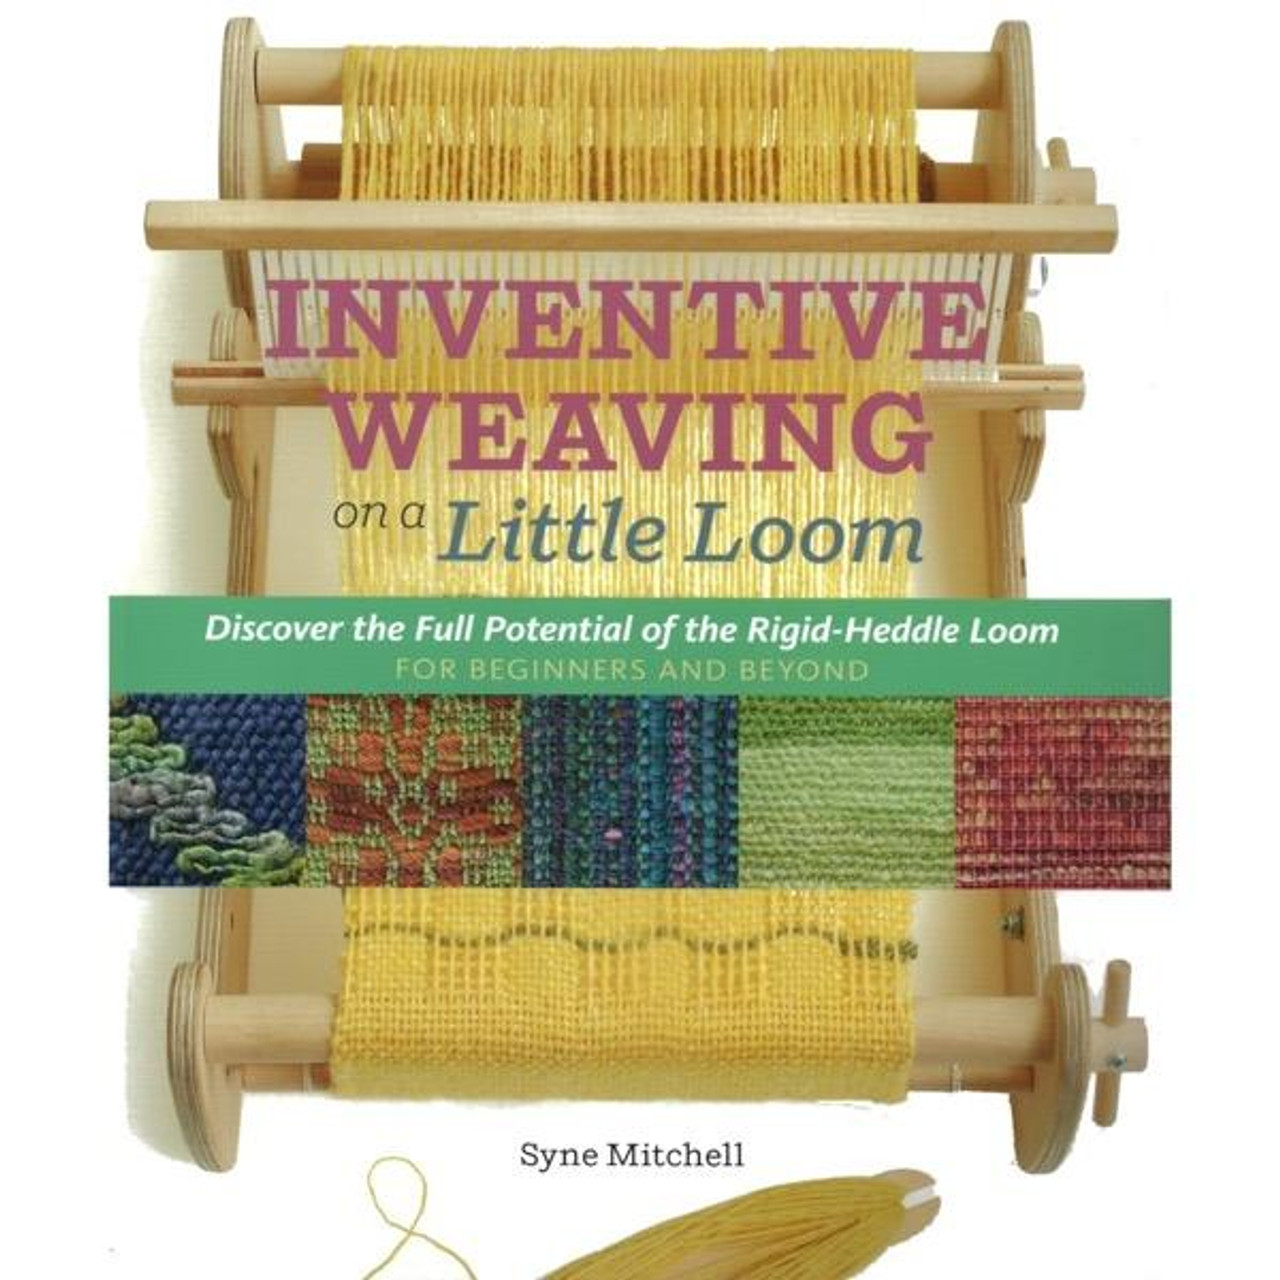 My First Weaving Loom at Lakeshore Learning